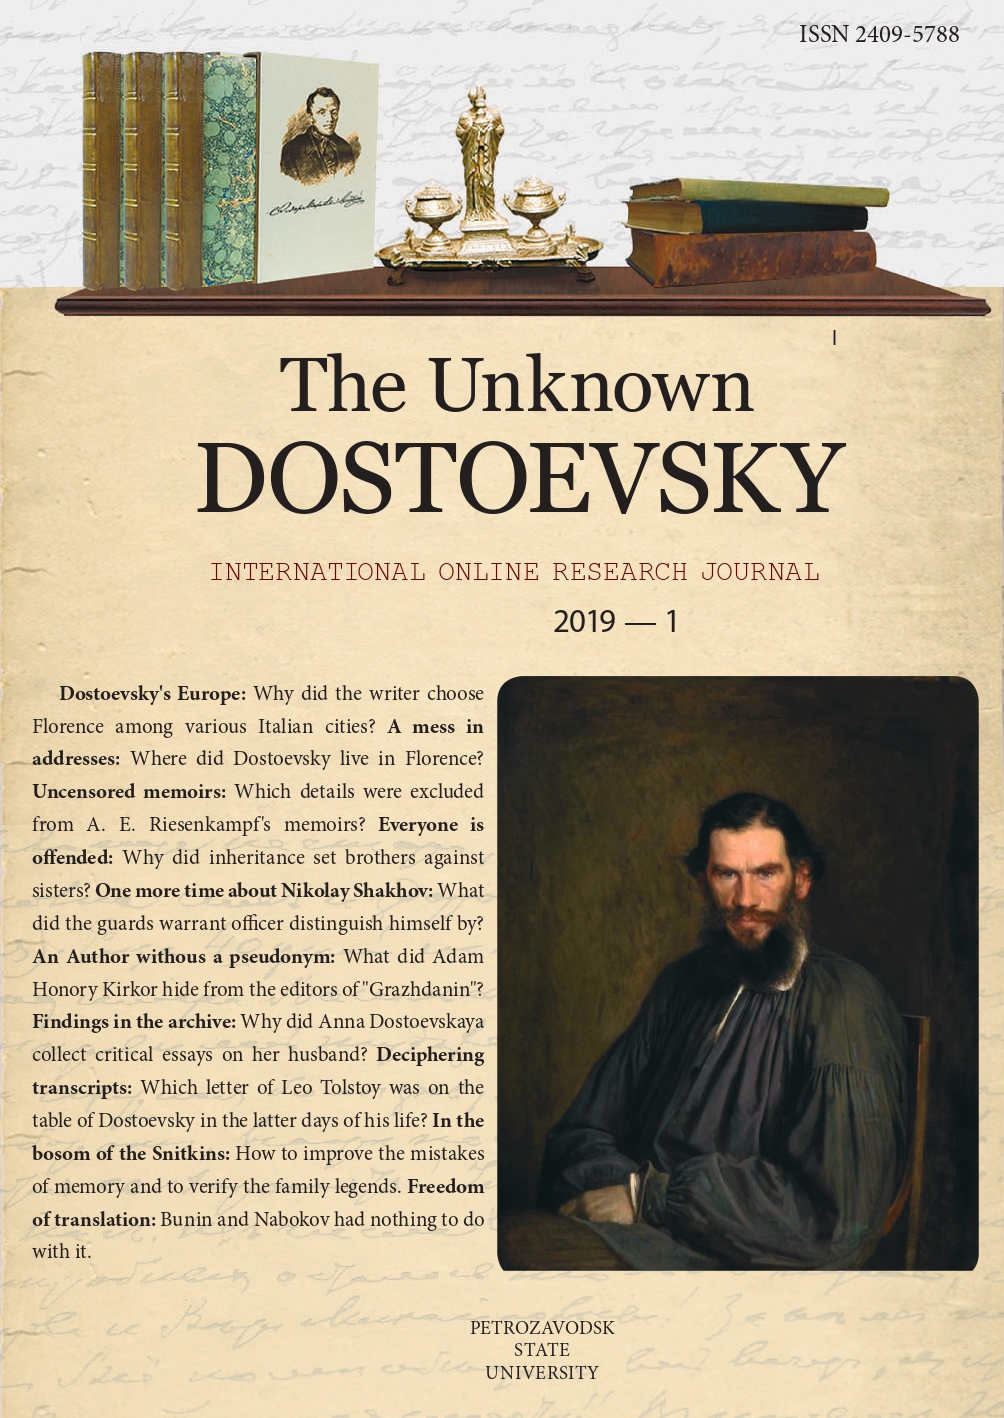 The Young Dostoevsky in Memory of A. E. Riesenkampf (Based on the Materials of the Manuscript Department of the Russian Literature History State Museum Named After V. I. Dahl) Cover Image